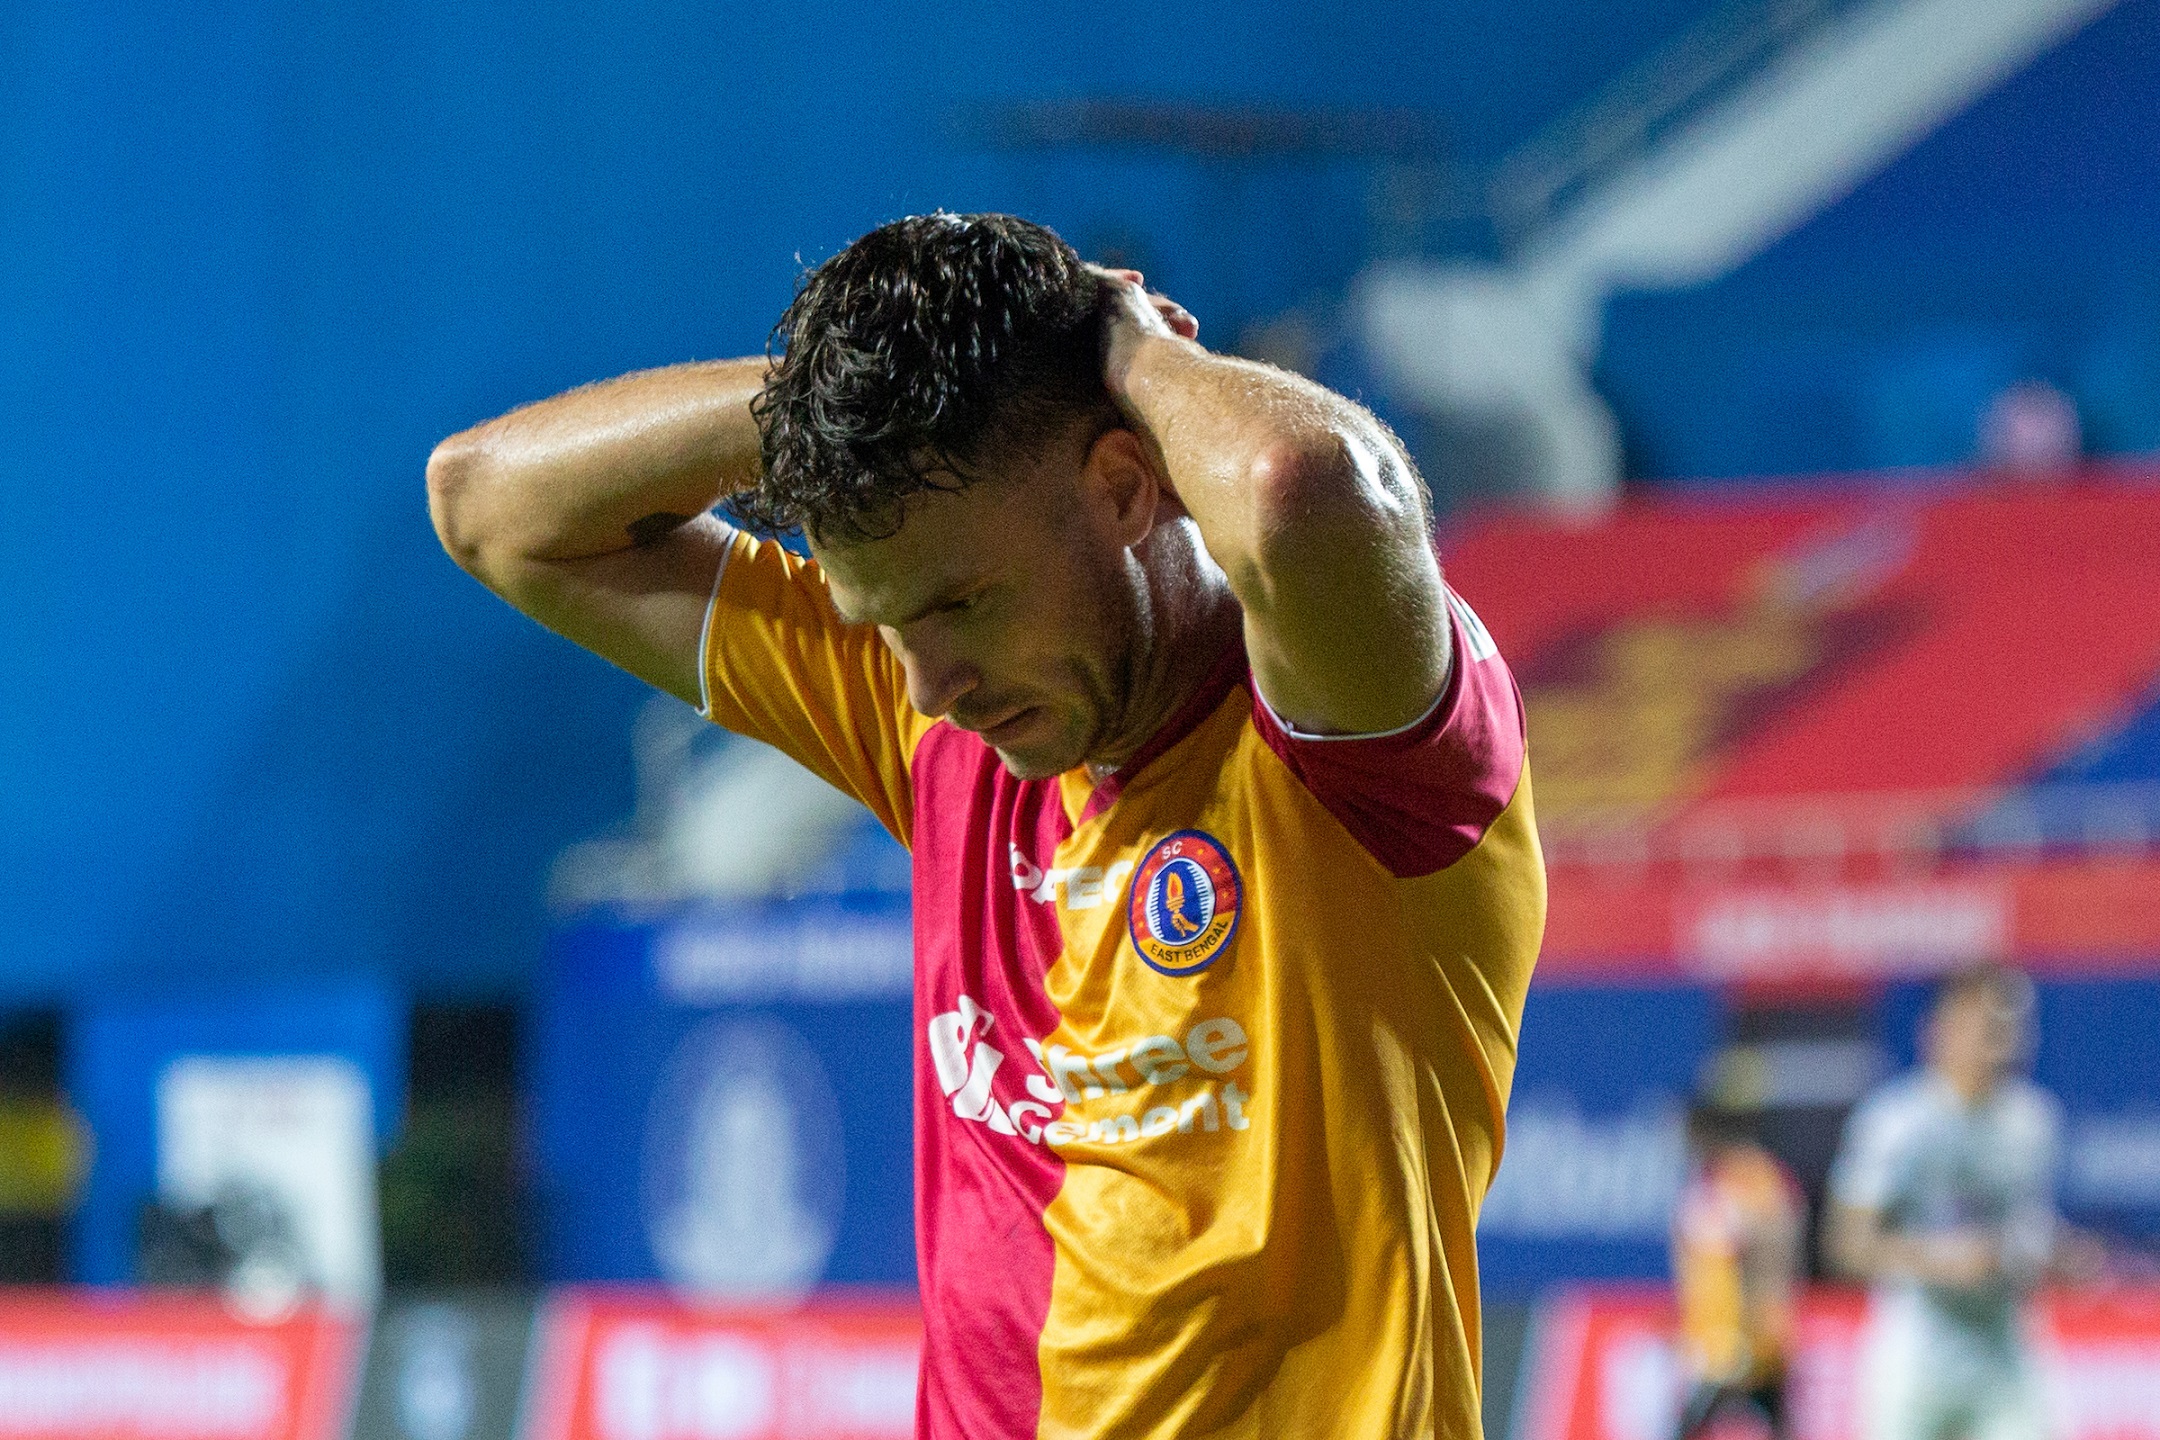 Antonio Perosevic of SC East Bengal reacts during match 27 of season 8 of HERO INDIAN SUPER LEAGUE played between SC East Bengal and Kerala Blasters FC at the Tilak Maidan Stadium in Goa, India, on 12th December 2021. Photo: R. Parthibhan/Focus Sports/ ISL